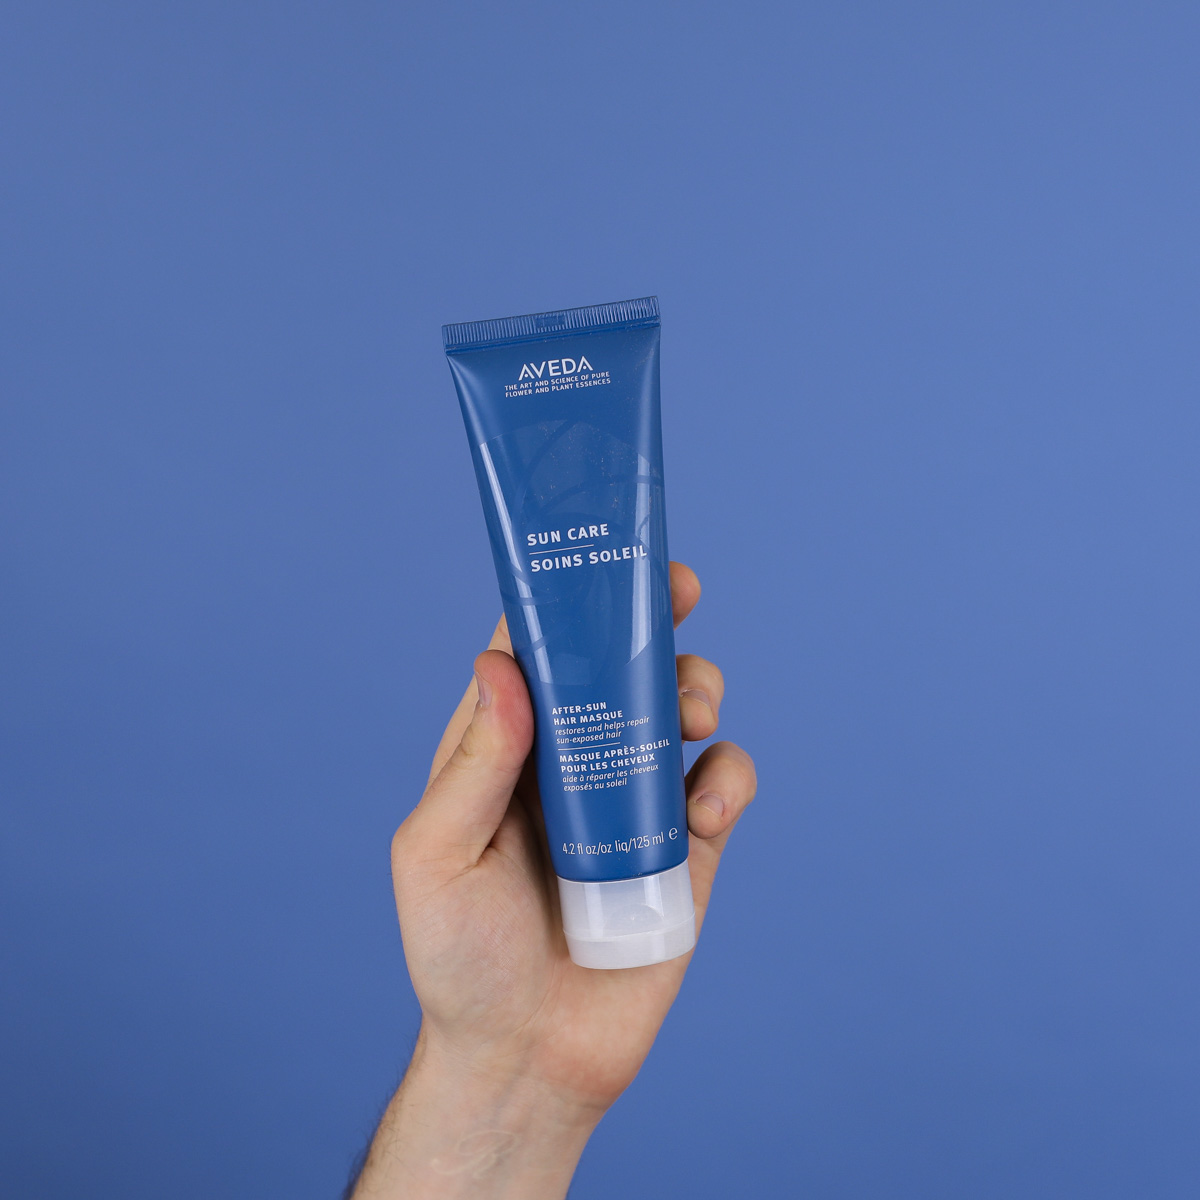 aveda-sun-care-after-sun-hair-masque-product-review-man-for-himself